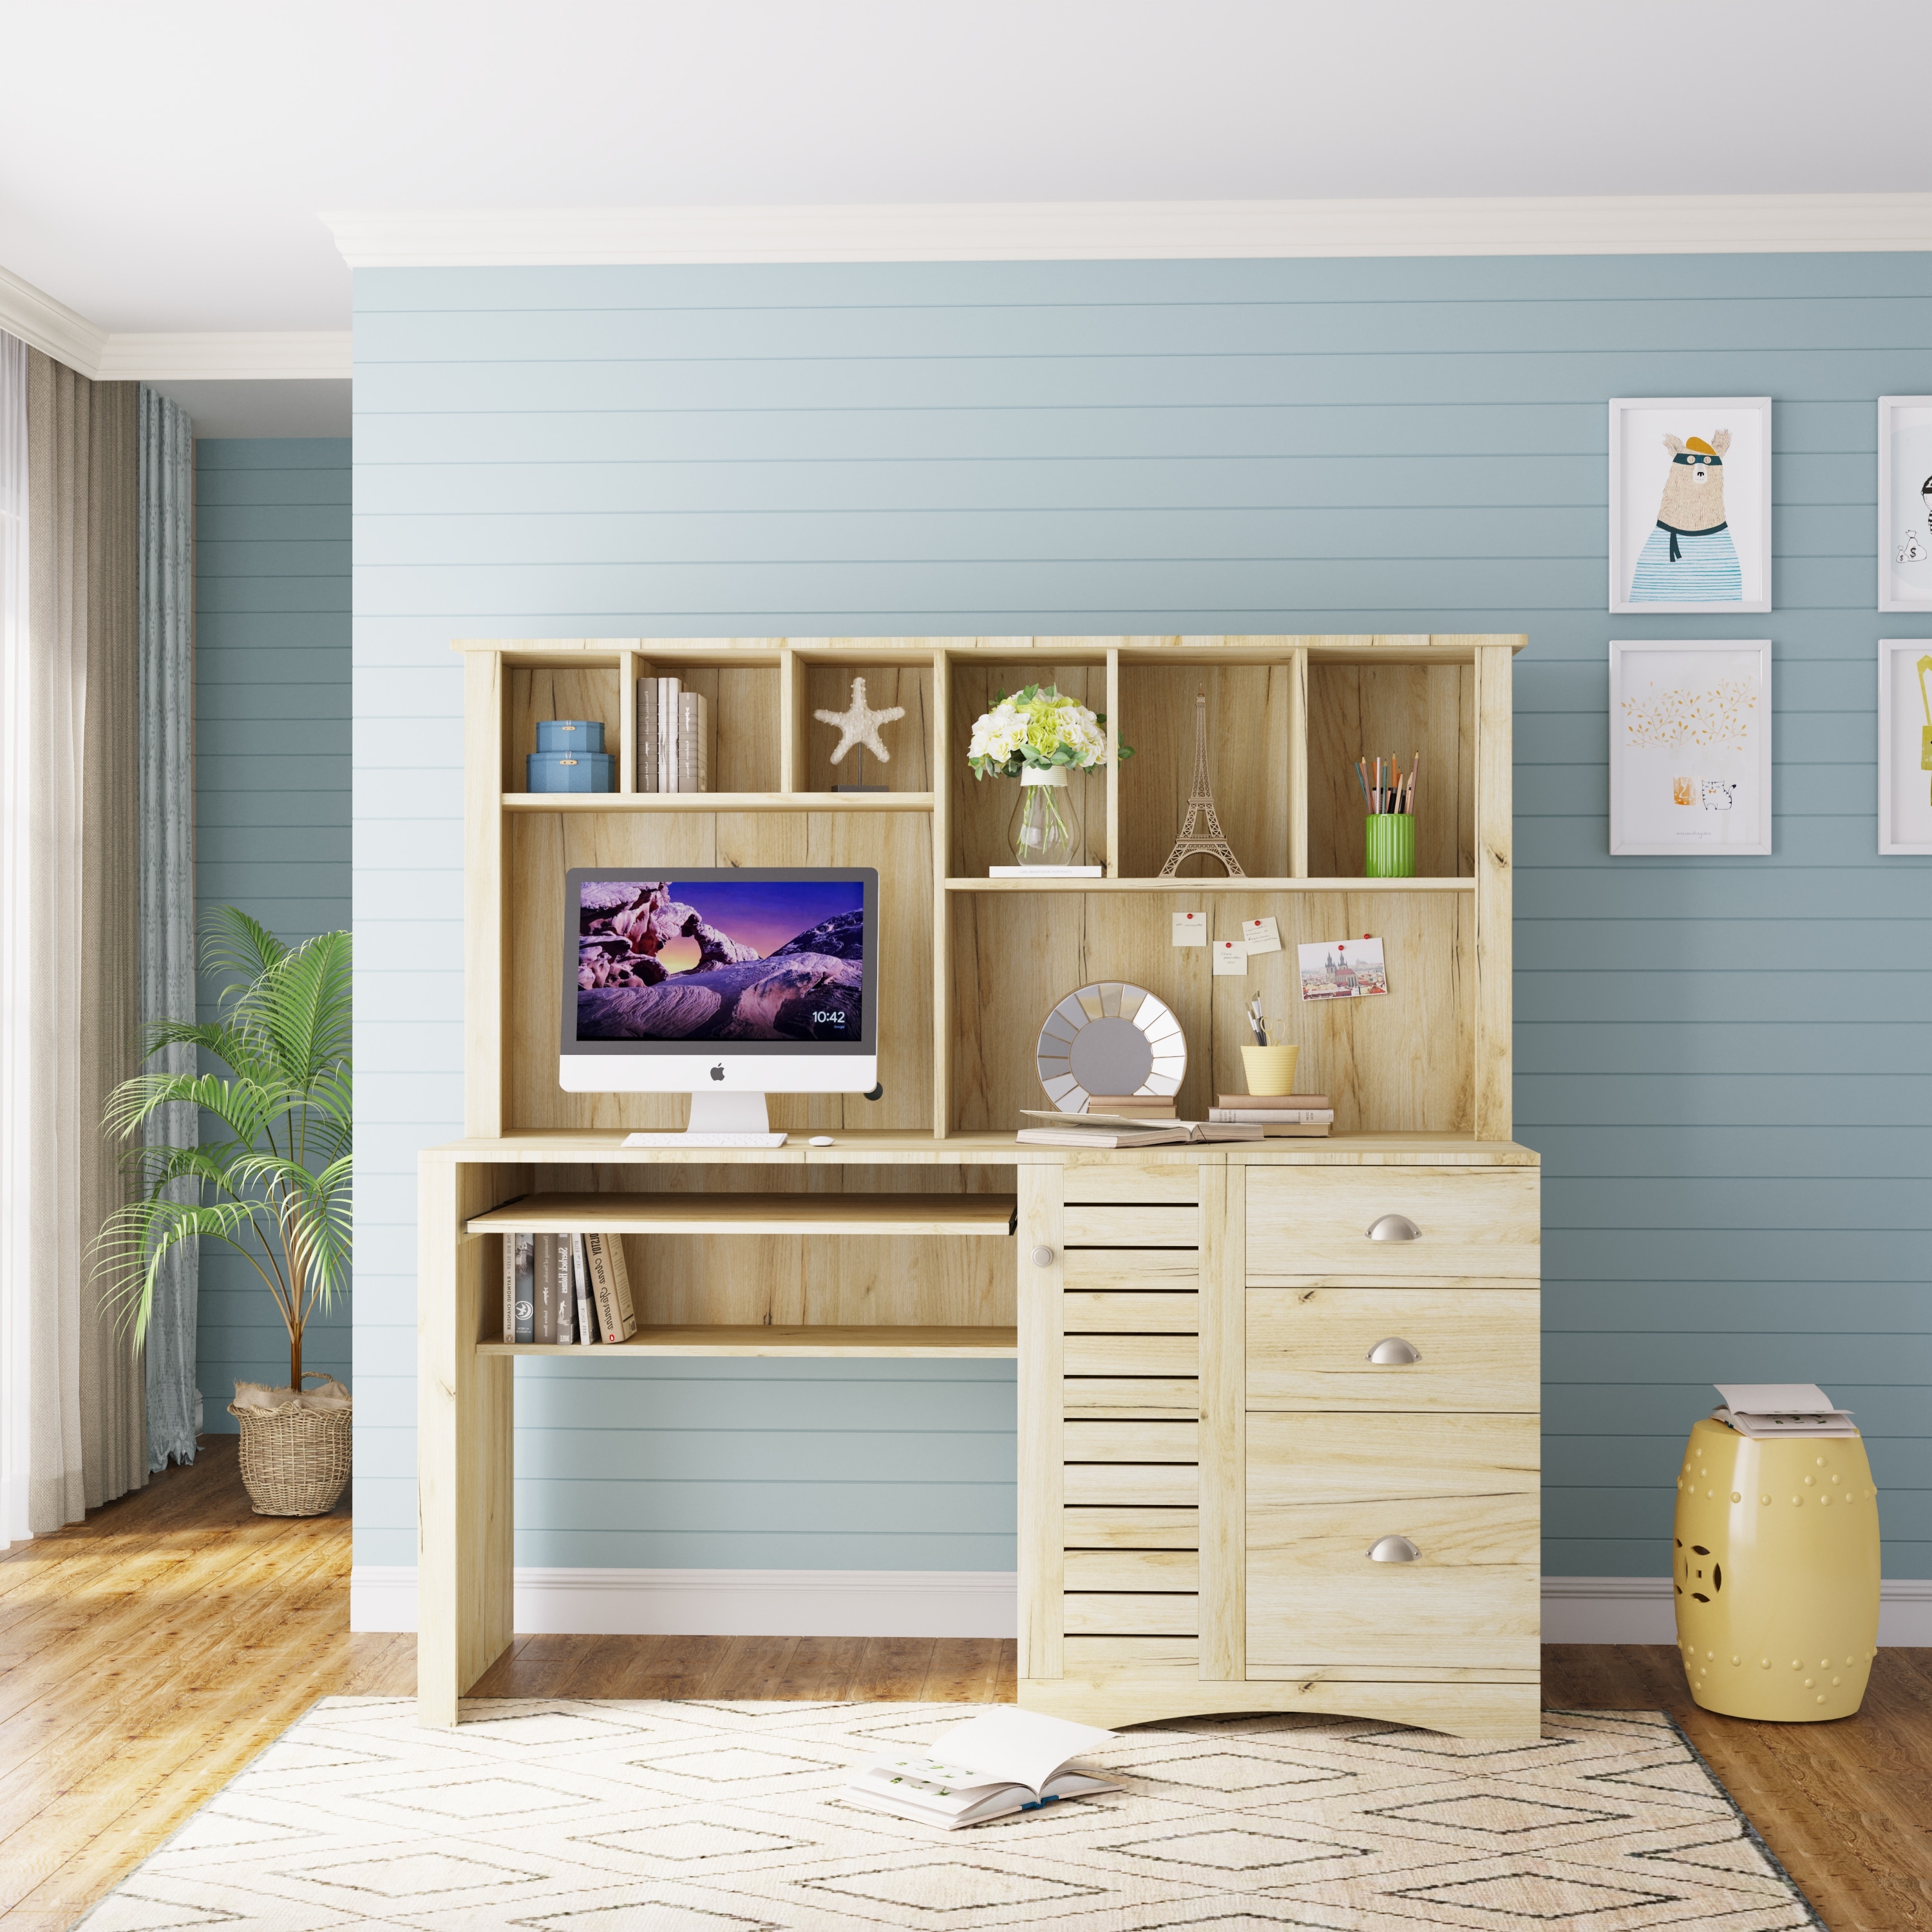 https://ak1.ostkcdn.com/images/products/is/images/direct/9c1abca4e1983869f12f3e0c1ed6be714129c9e0/Modern-Home-Office-Computer-Desk-with-Hutch.jpg